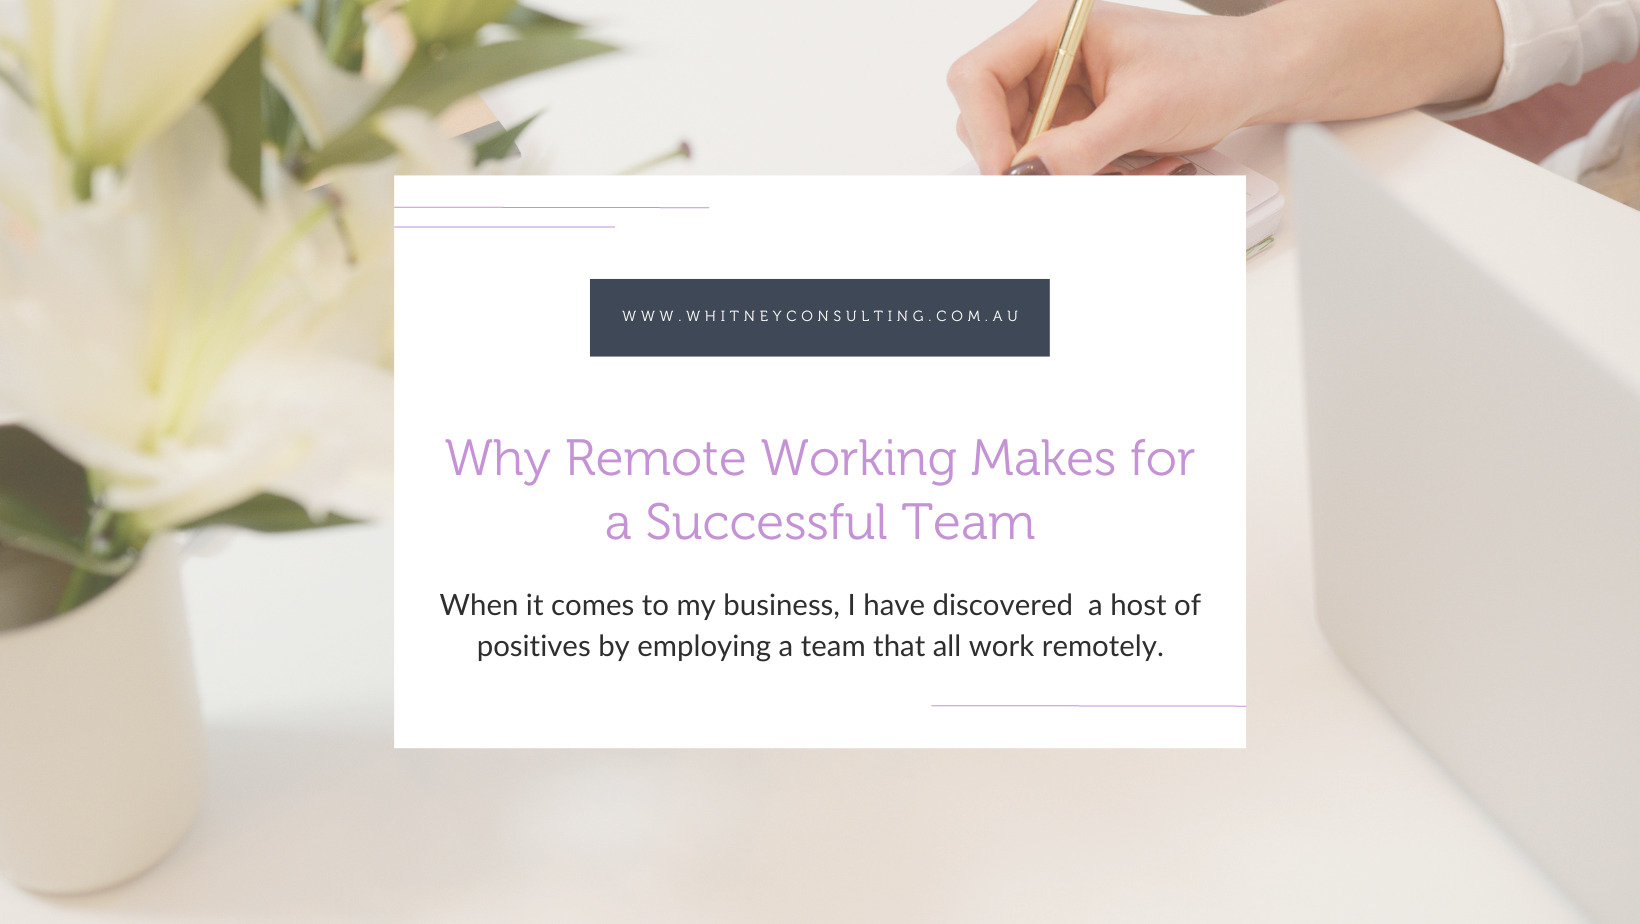 Why Remote Working Makes for a Successful Team